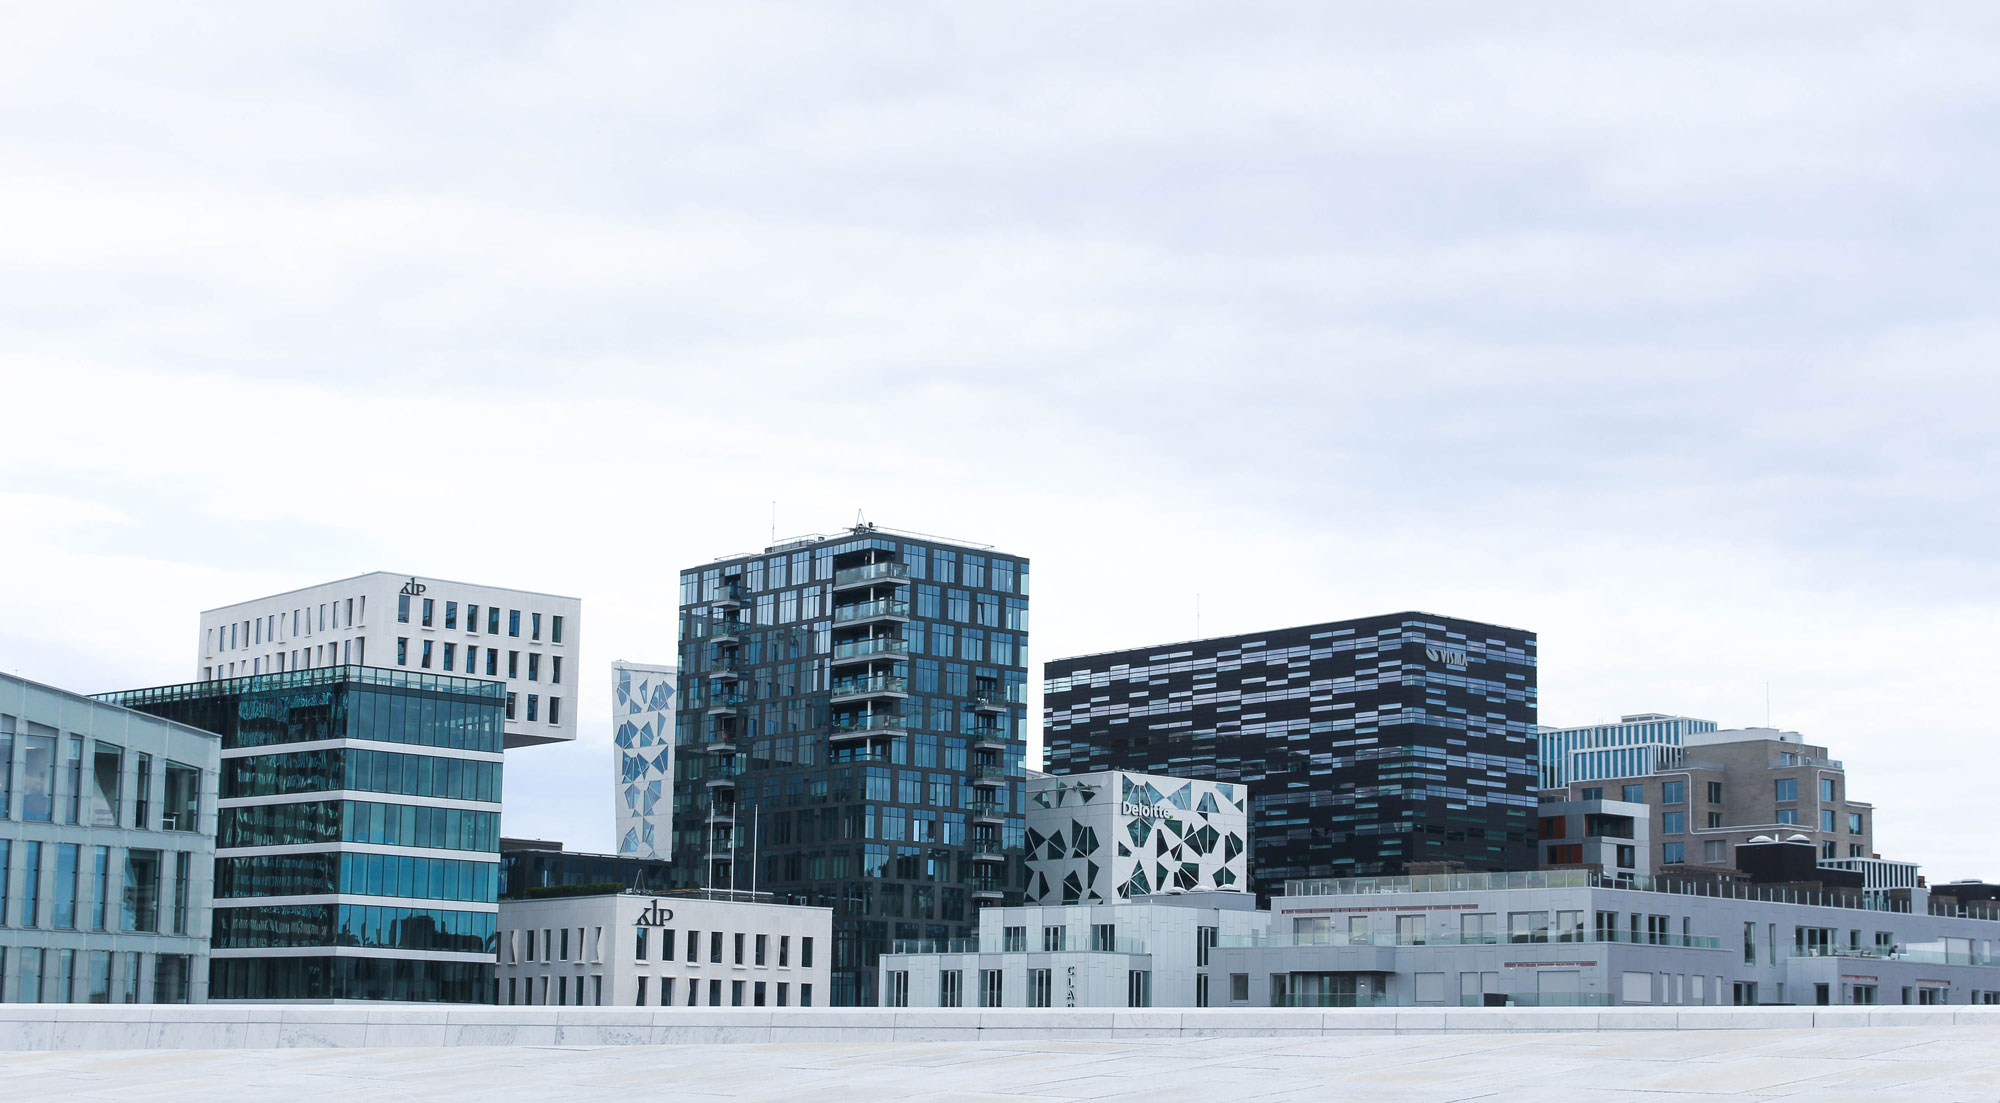 Modern architecture along the waterfront in Oslo, Norway